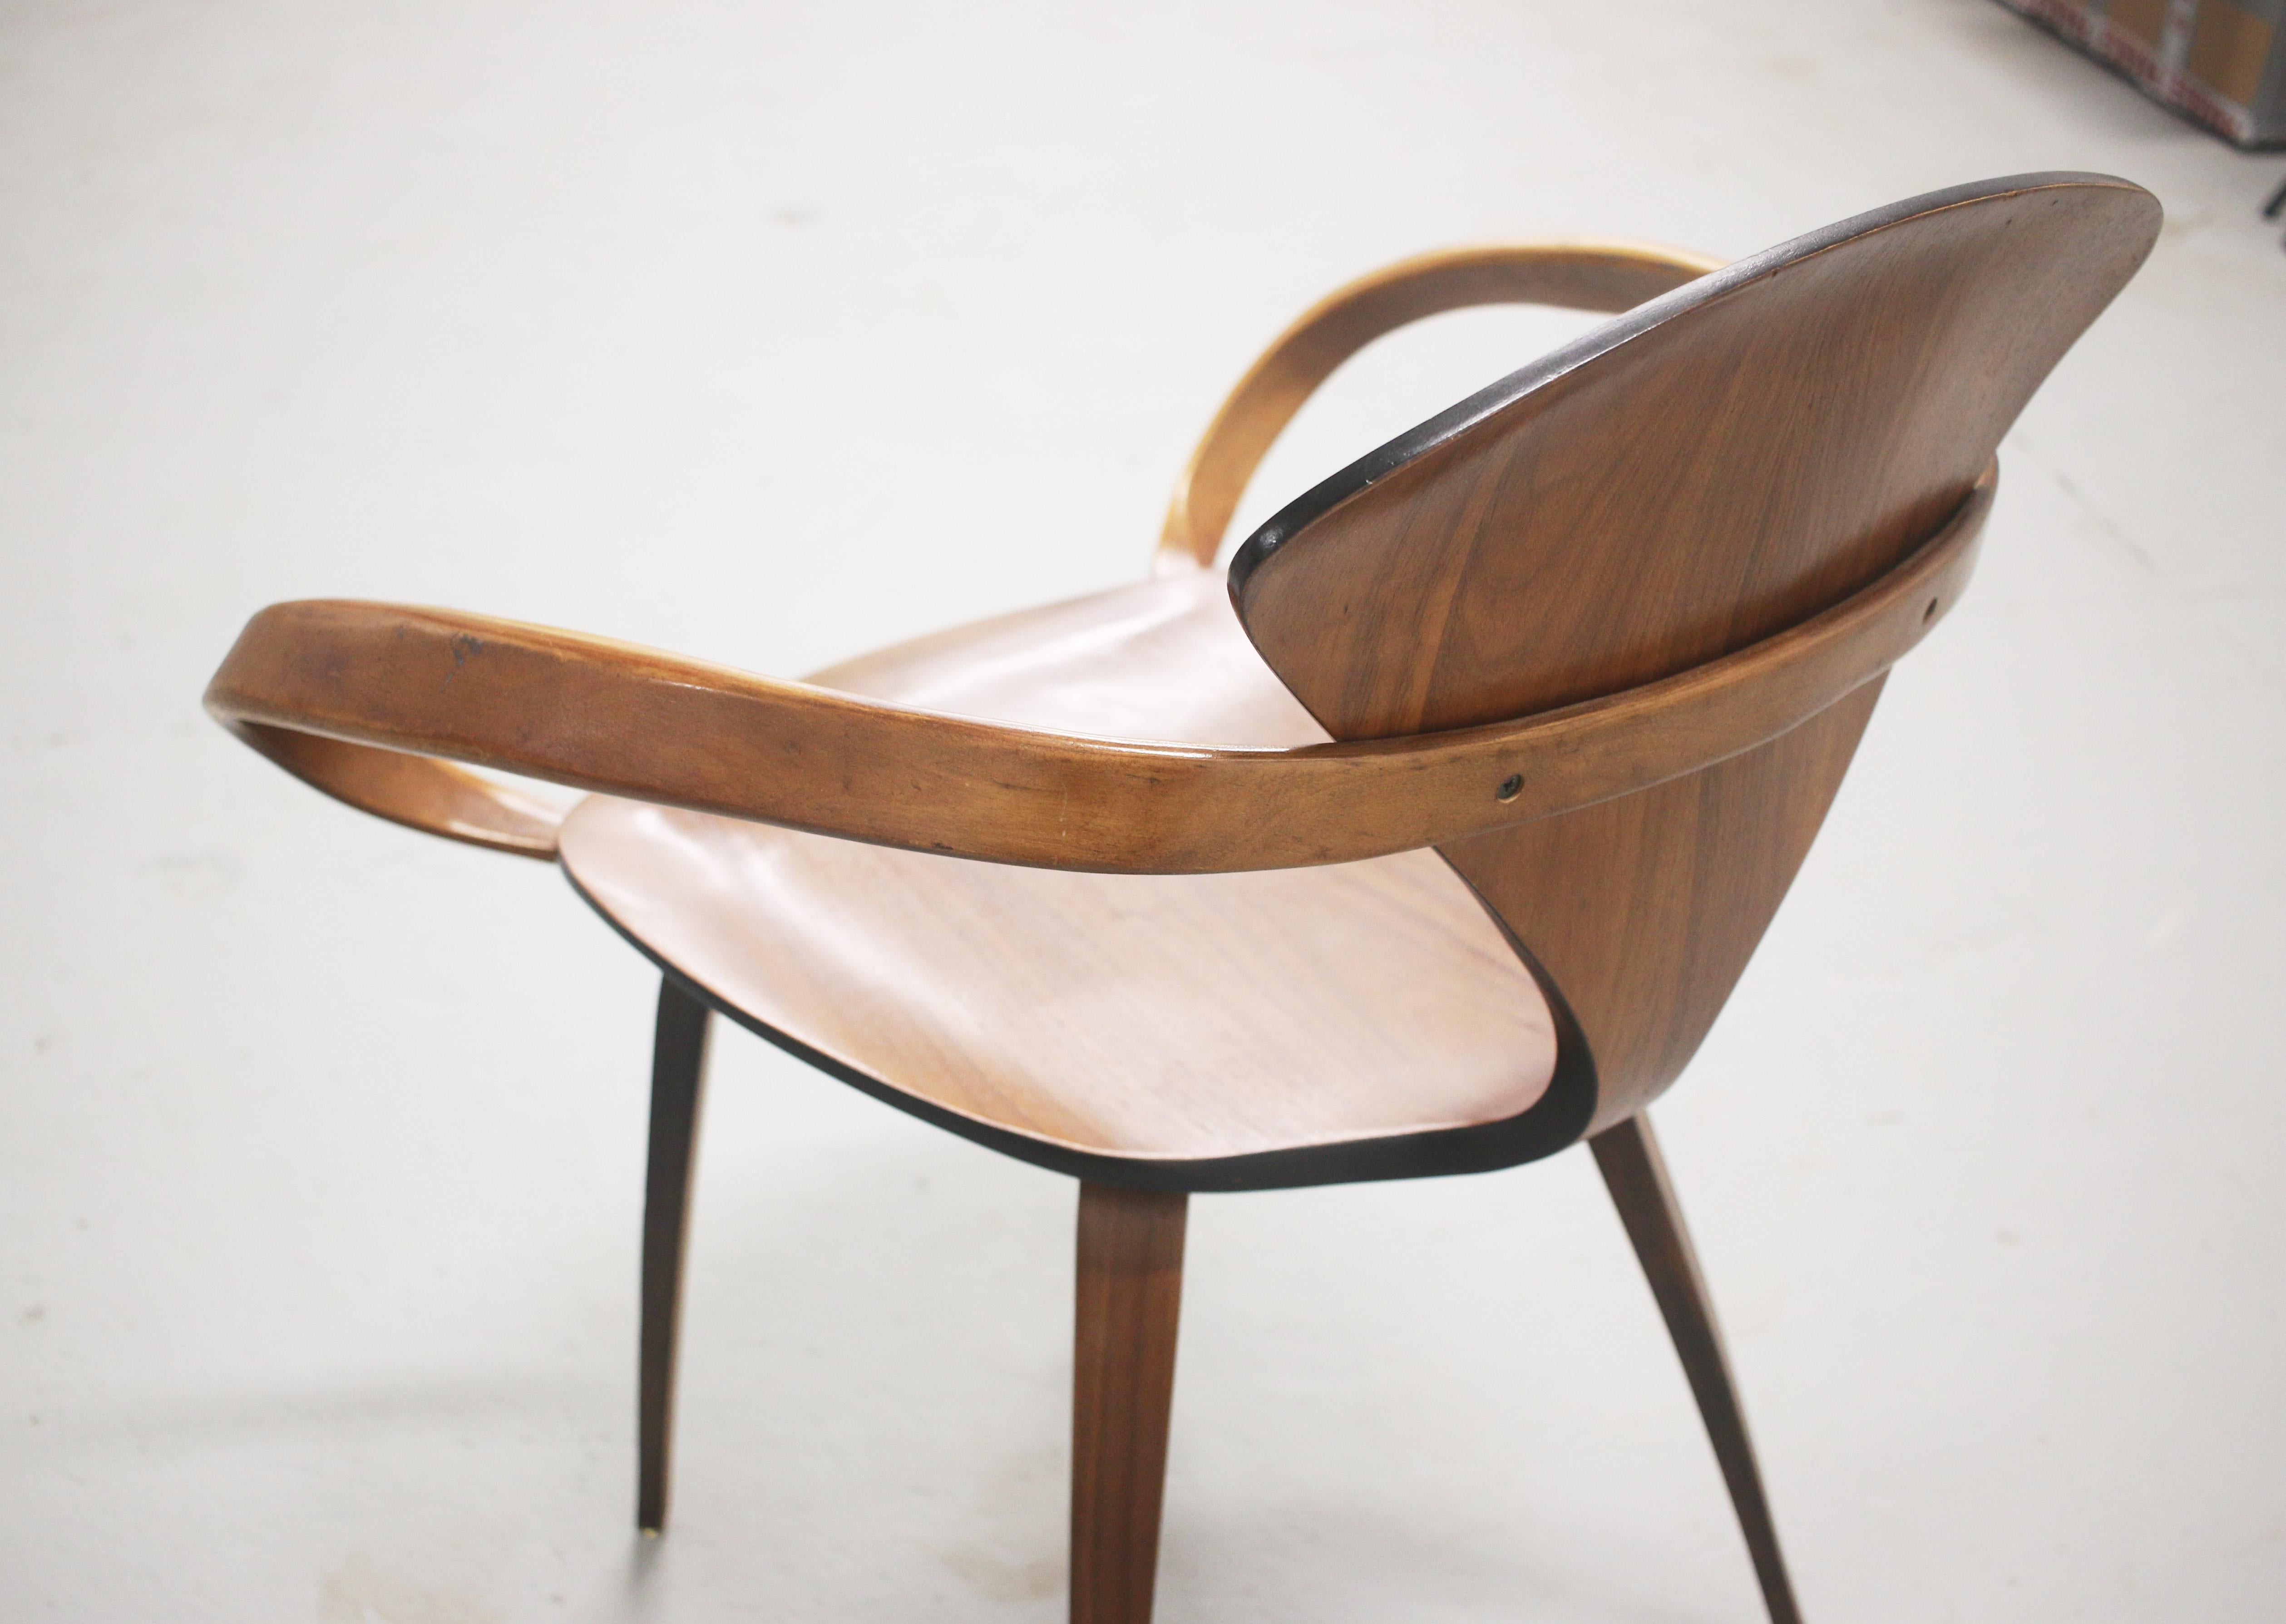 Wood Norman Cherner Pretzel Dining Chair, Made by Plycraft, USA, 1960s